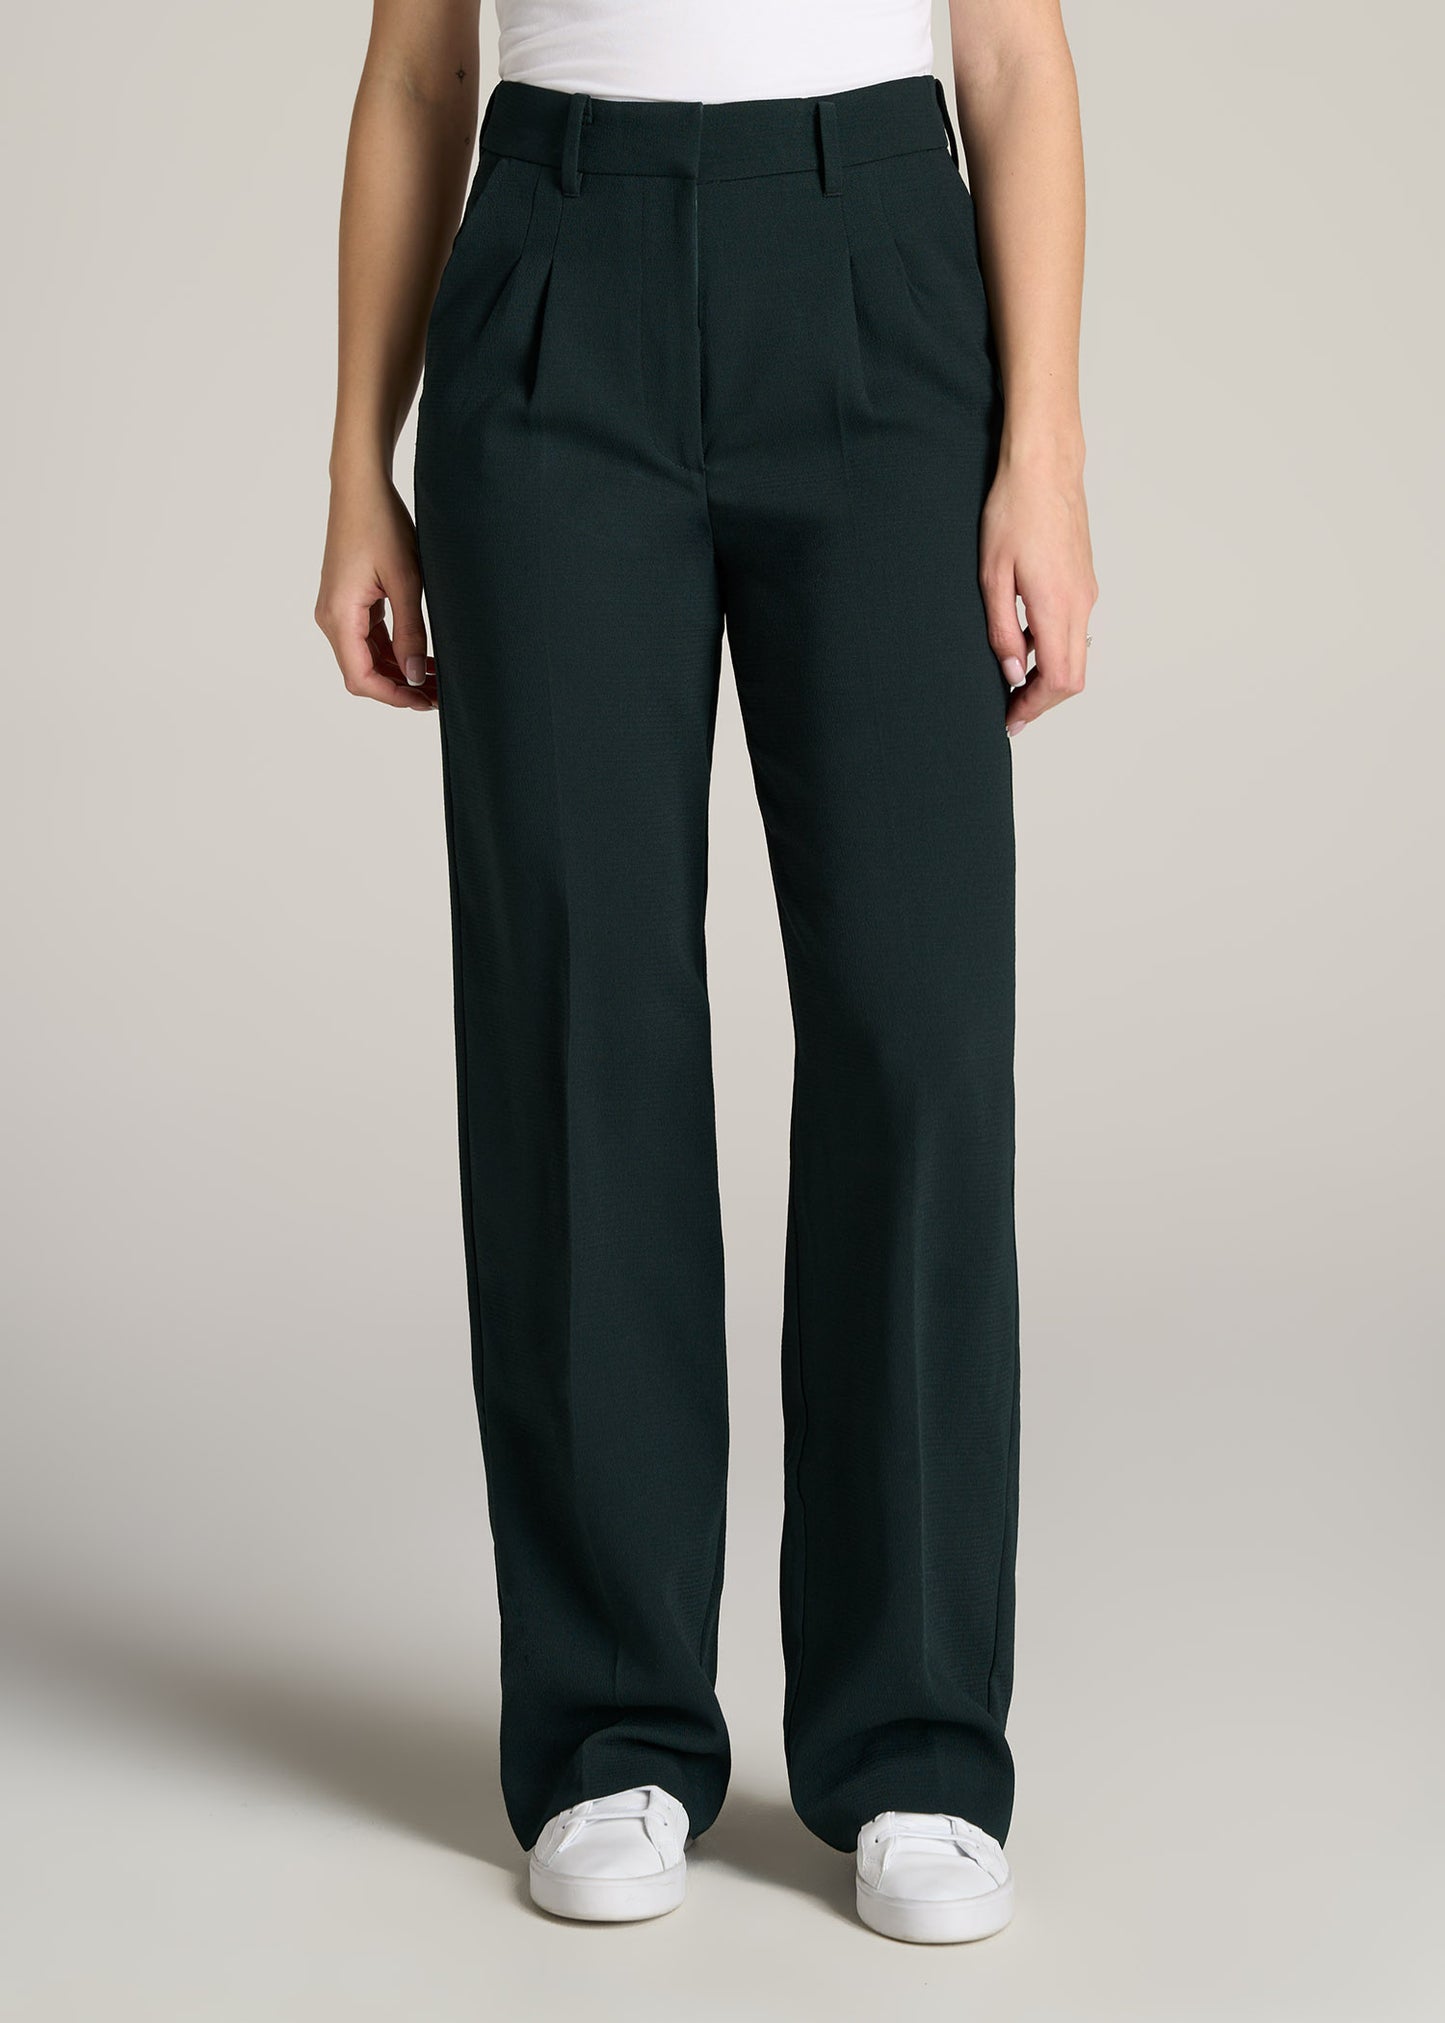 Pleated Dress Pants for Tall Women, American Tall